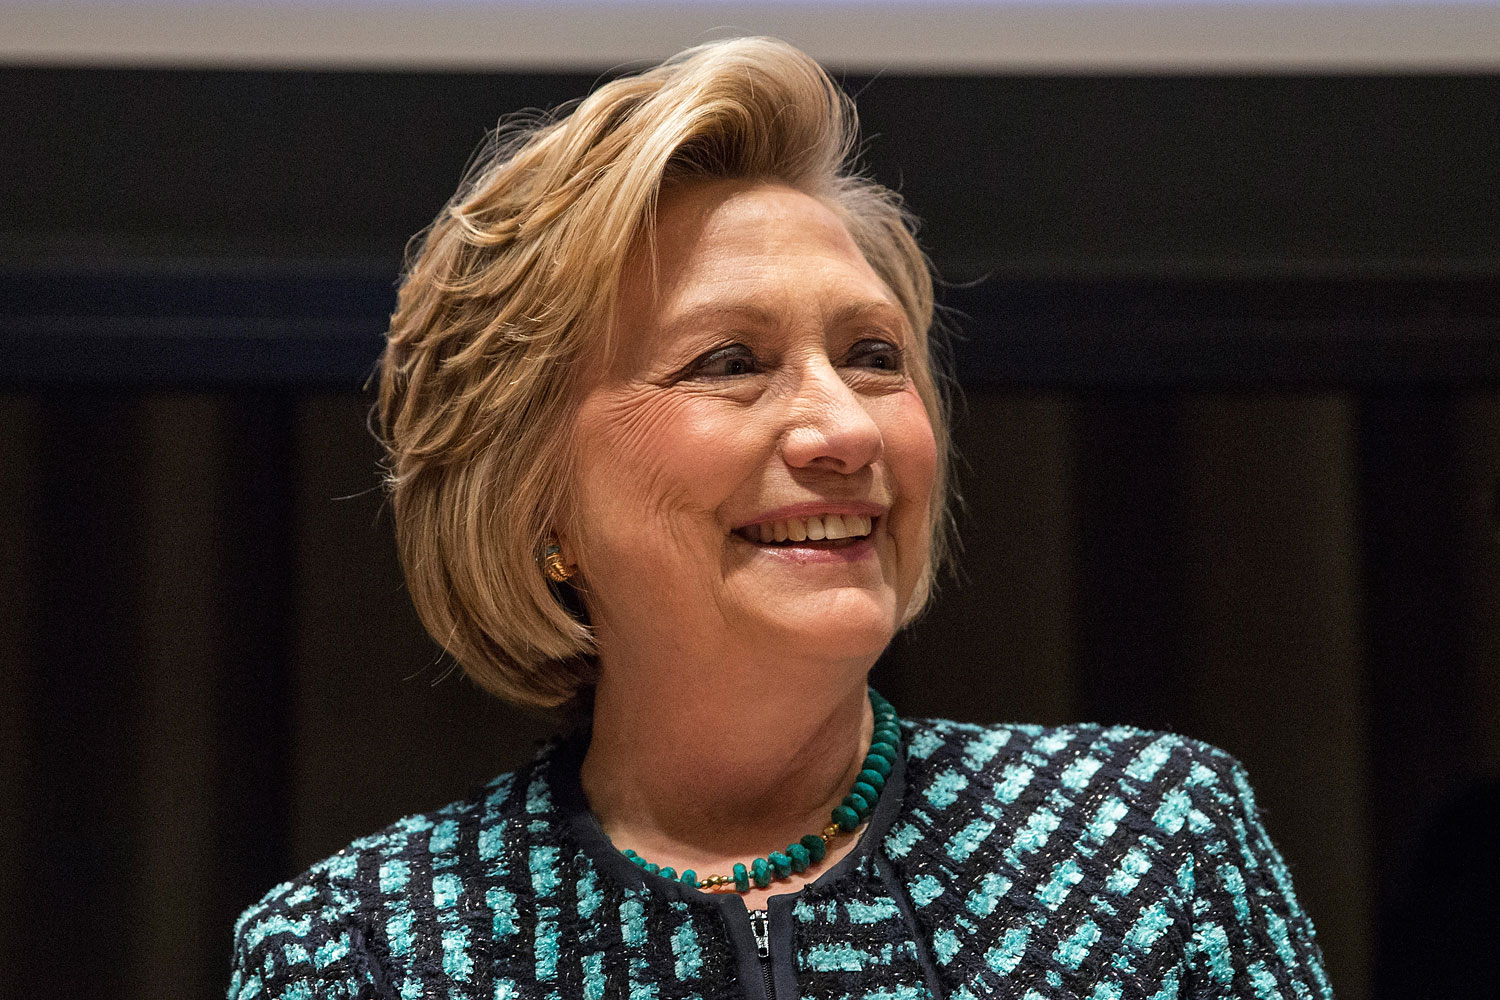 Hillary Clinton at the United Nations on March 7, 2014 in New York City. (Andrew Burton&mdash;Getty Images)